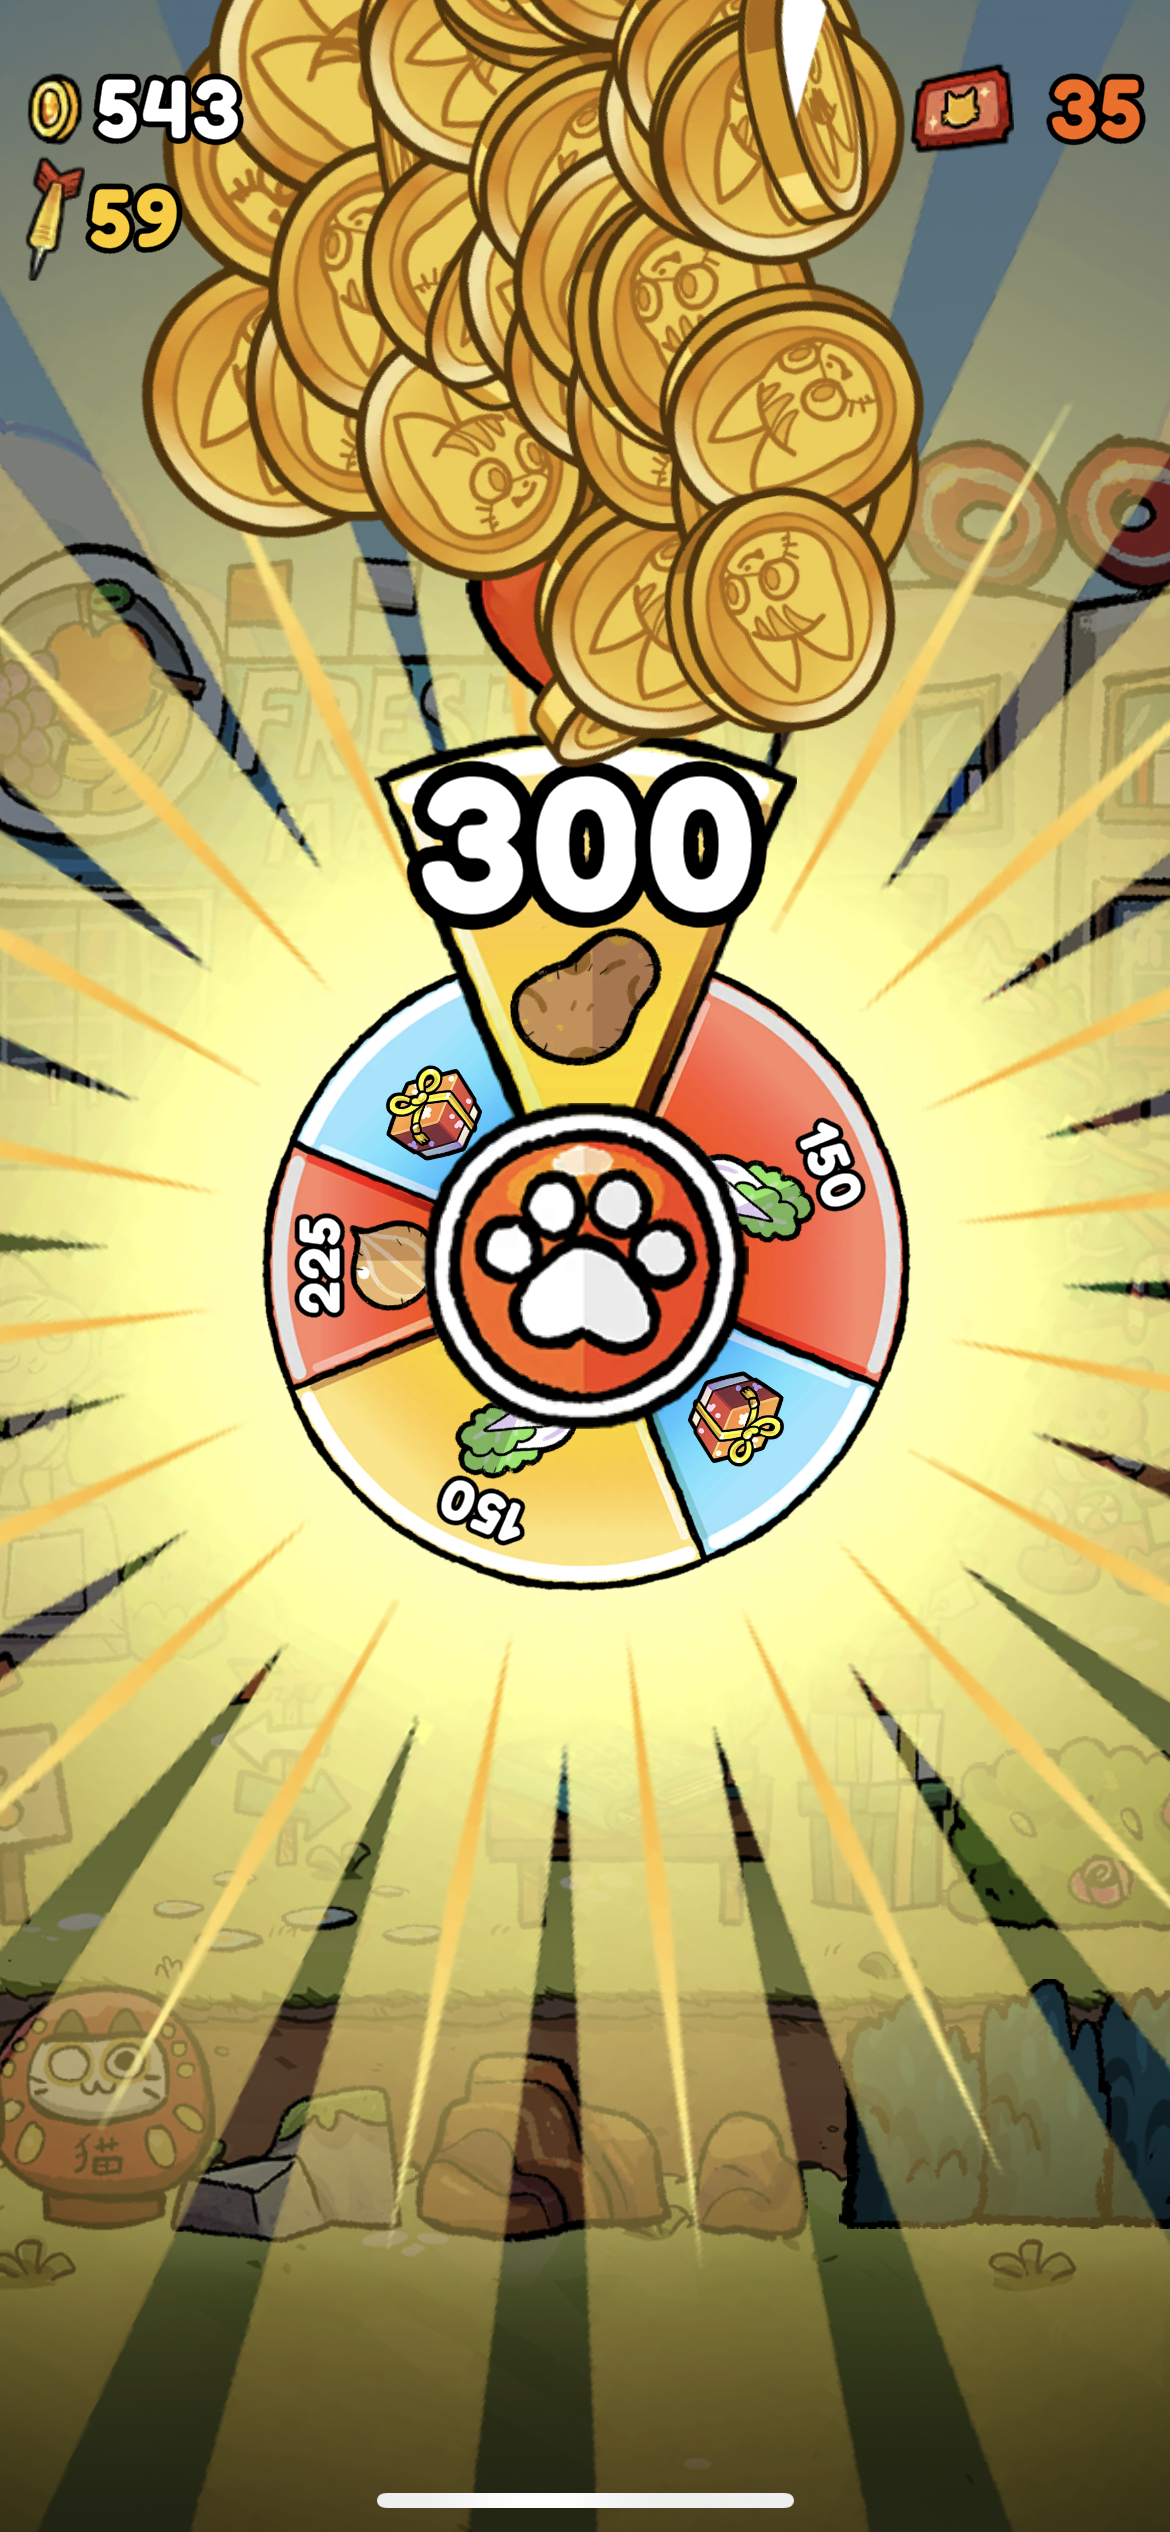 Kimono Cats (iPhone): COMPLETED!